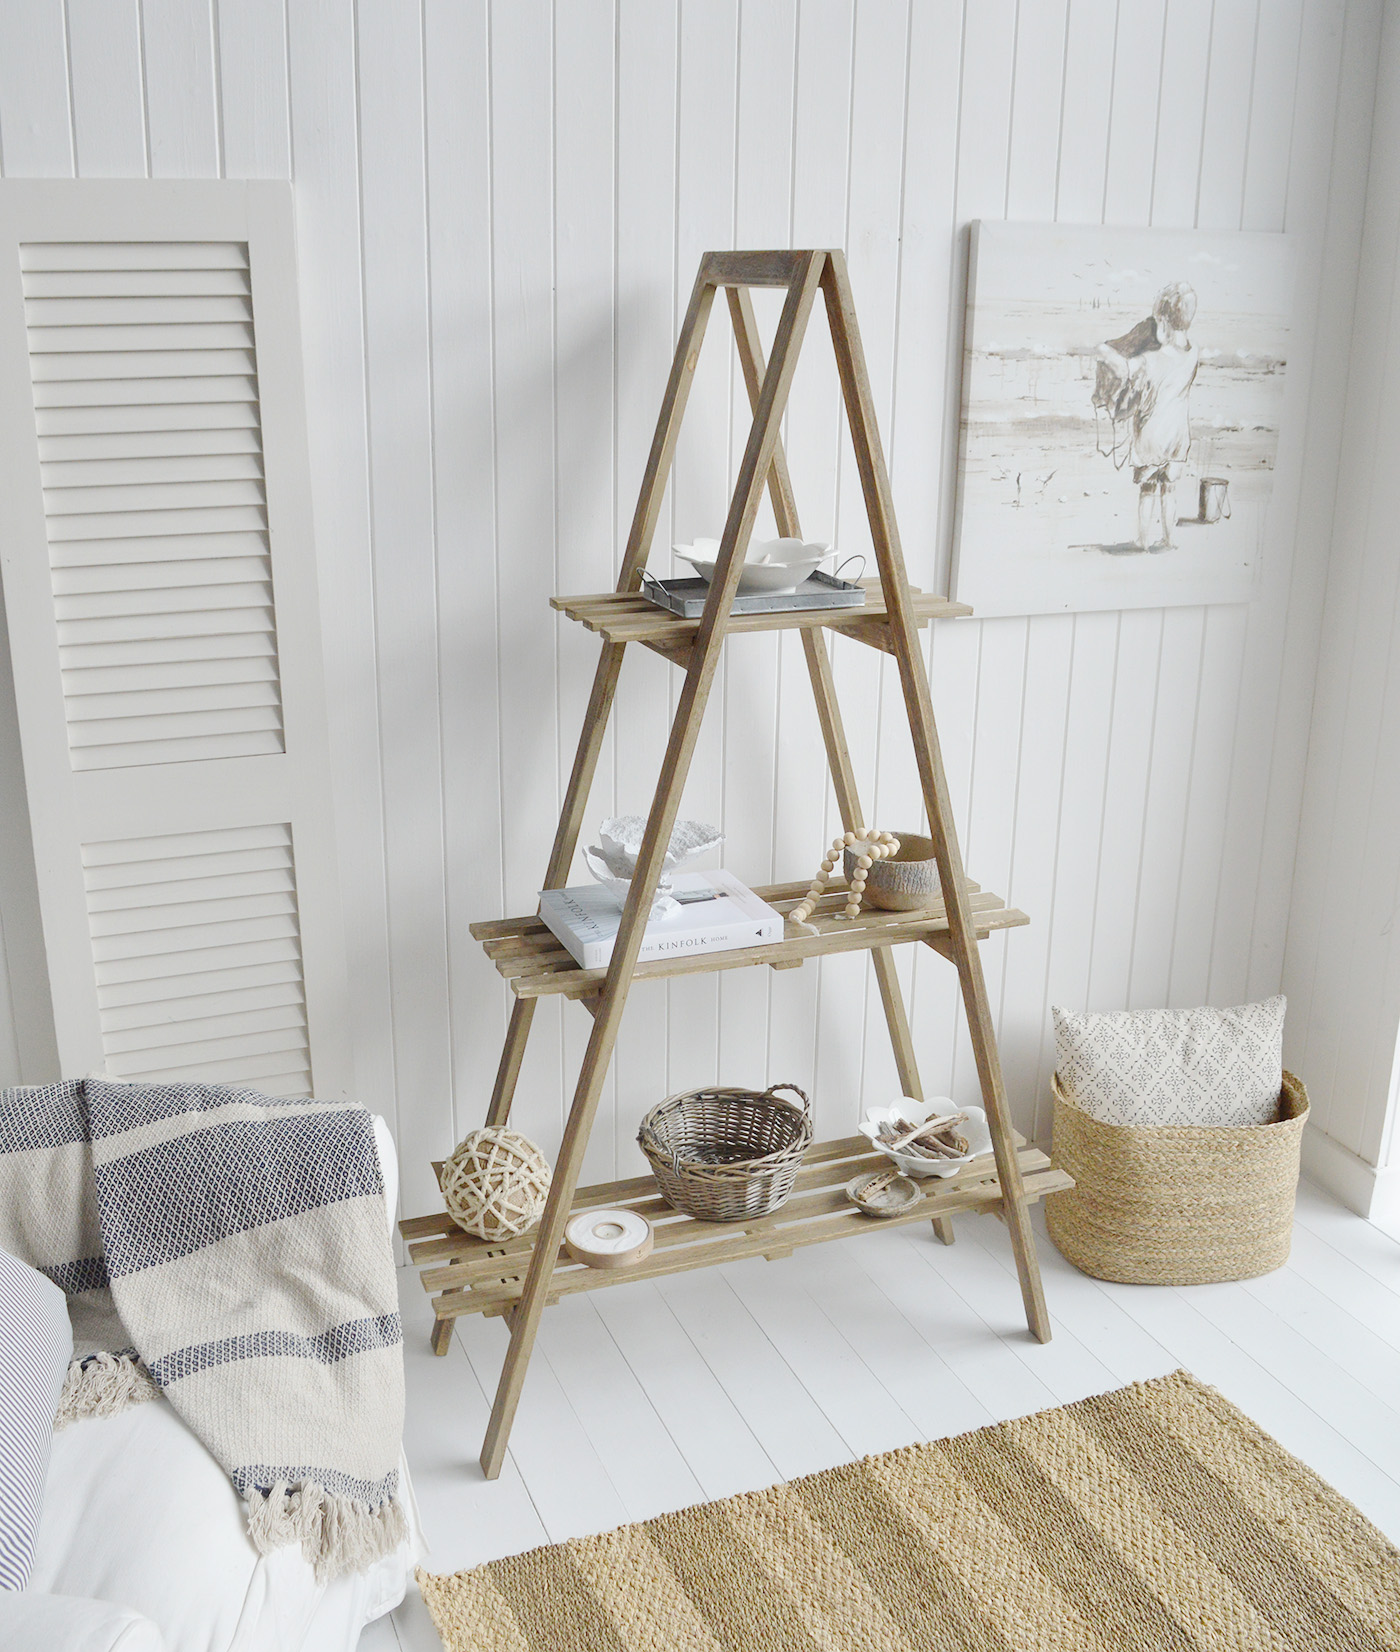 Jackson freestanding shelf unit - New England Country Coastal Furniture</ from The White Lighthouse Furniture. Bathroom, Living Room, Bedroom and Hallway Furniture for beautiful homes in New England, coastal, city  and country home interiors